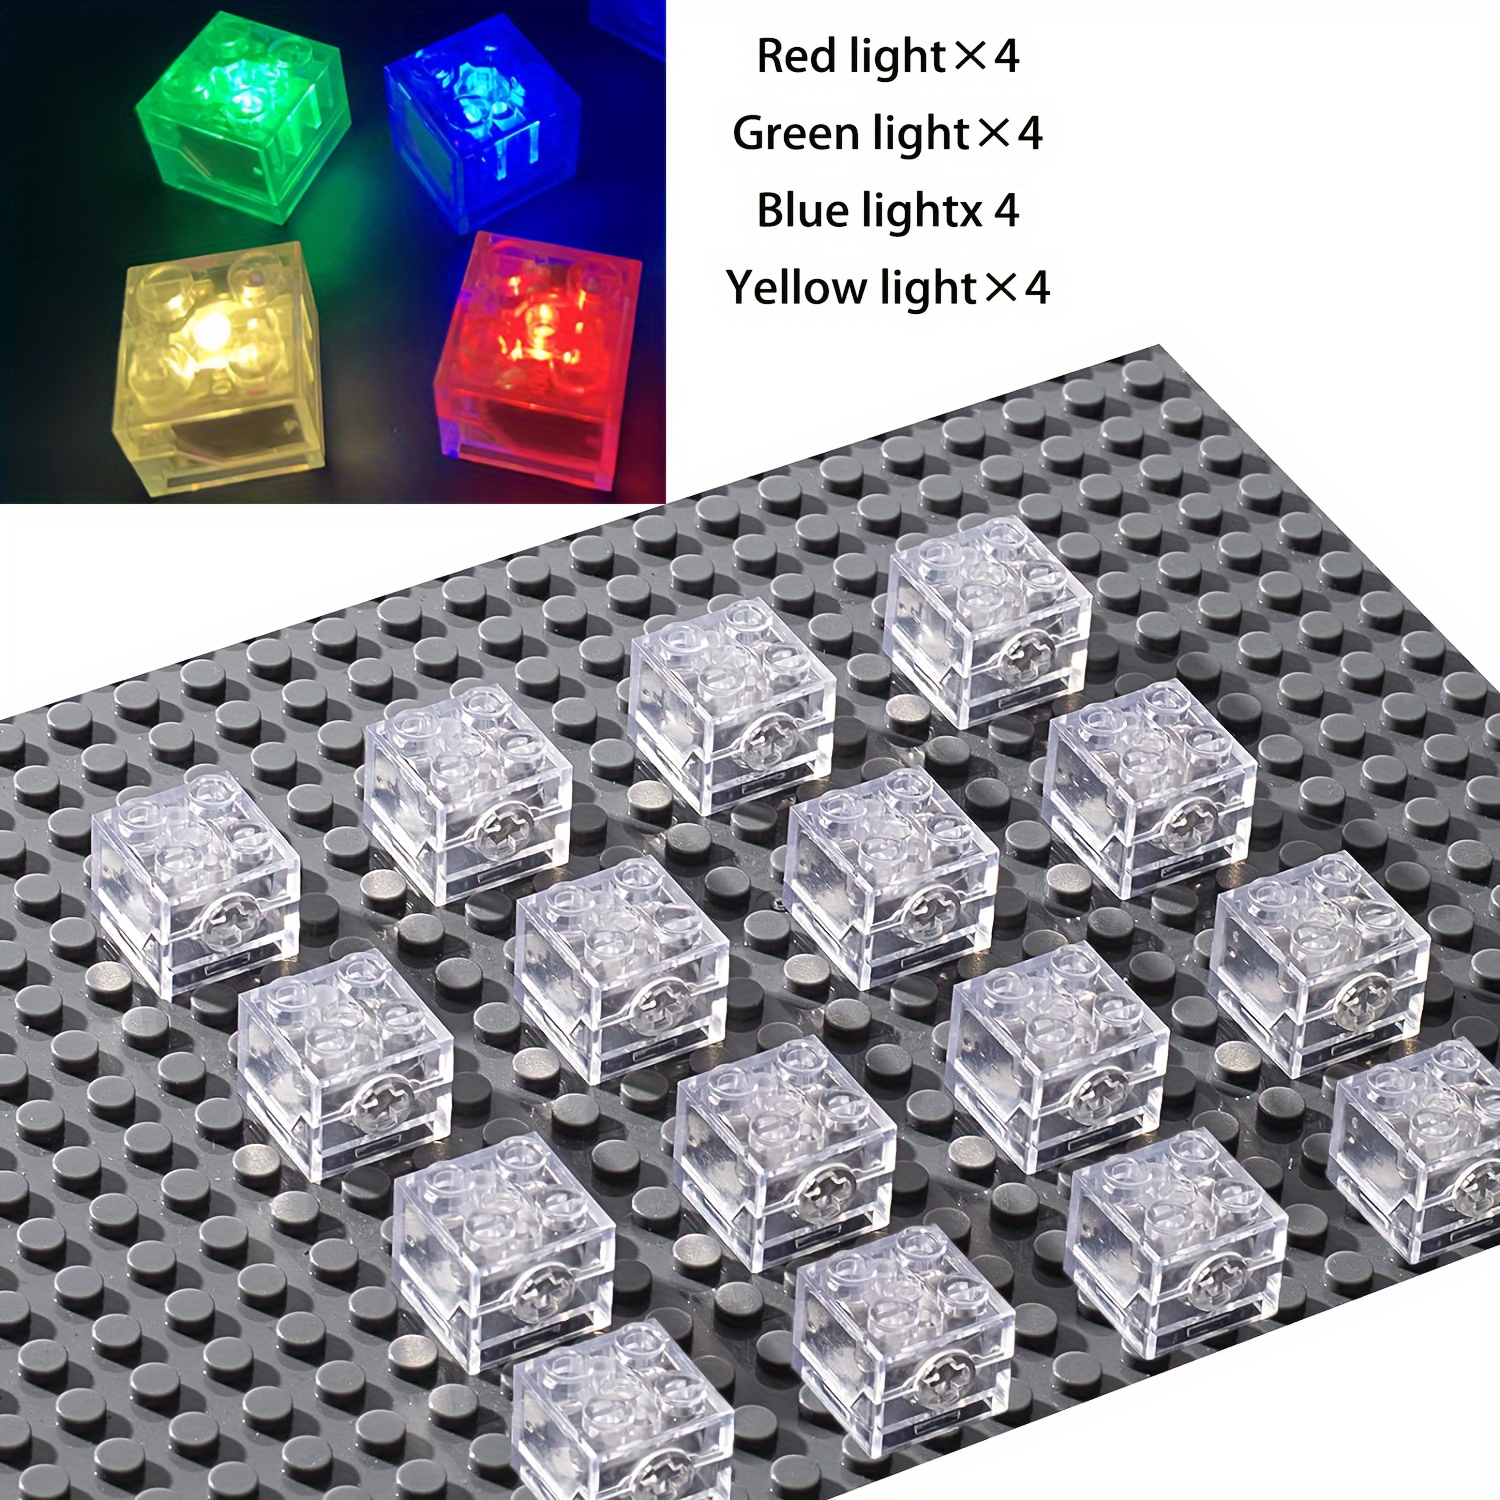 

16pcs Light Up Bricks Accessory Kit, 2x2 Classic Clear Multicolored Led Light Bricks Set, Compatible With All Major Brands, Christmas Gift, Red/blue/green/yellow